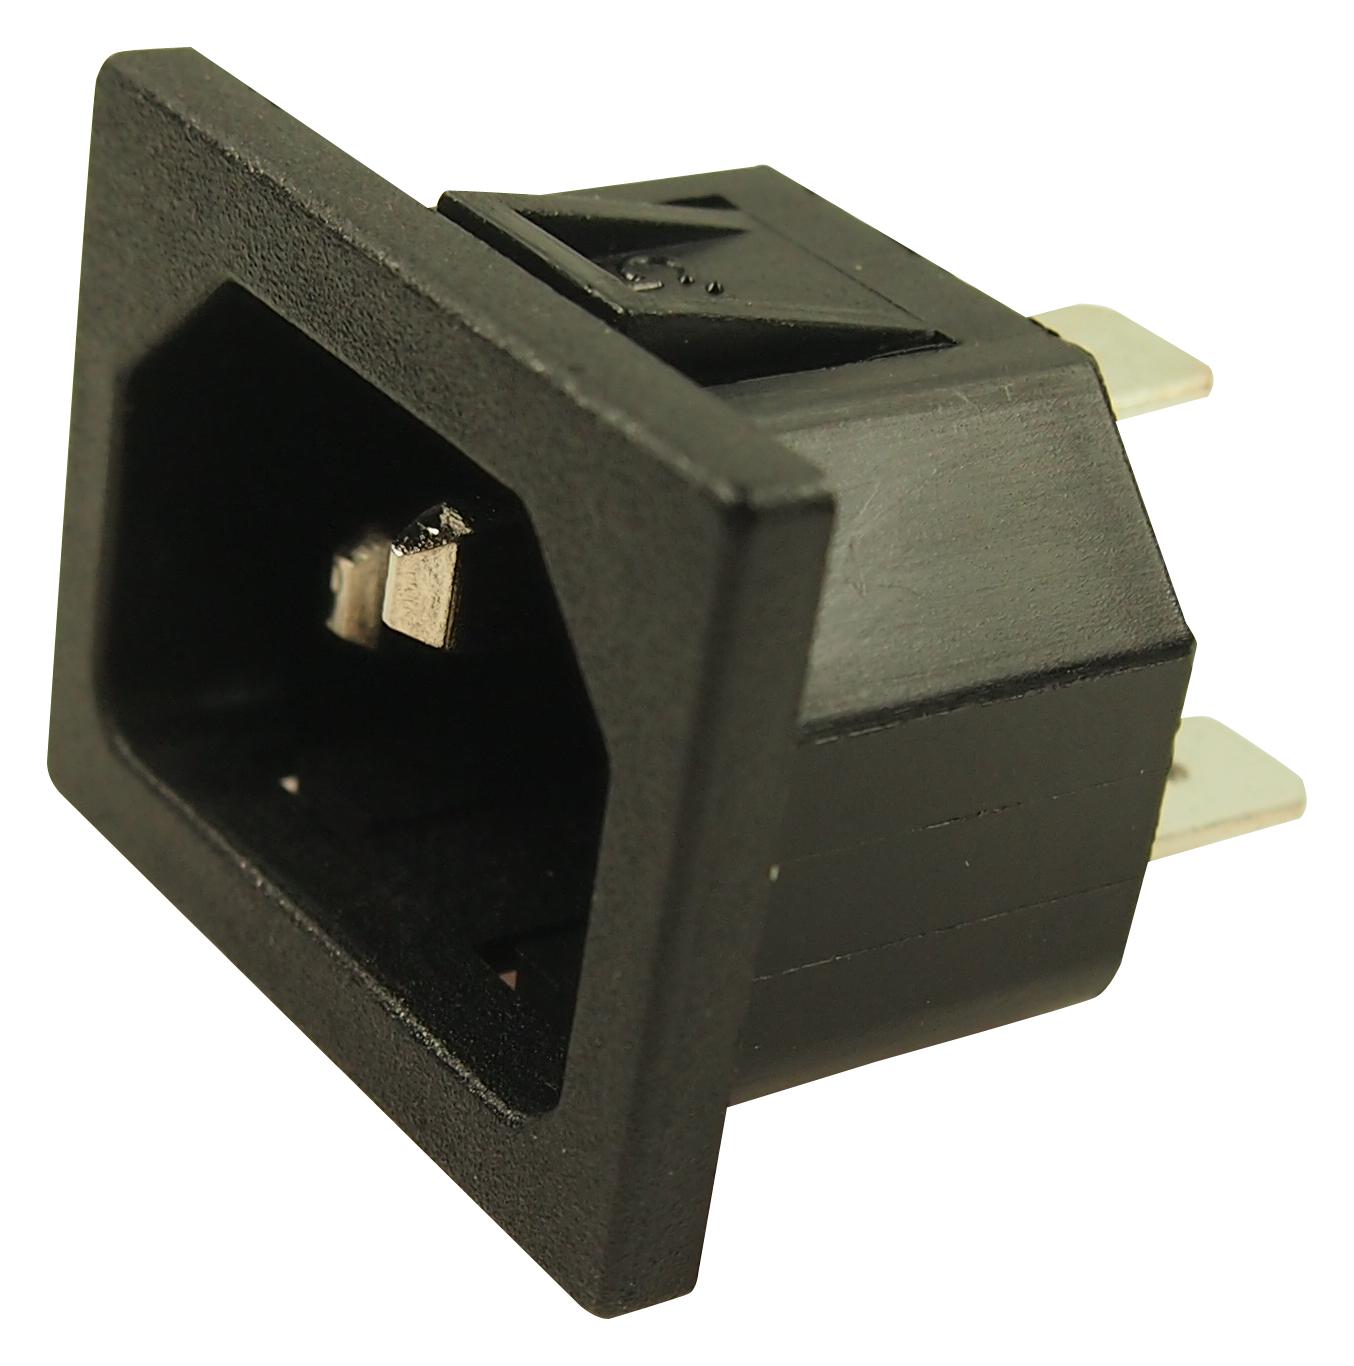 CL19192RB POWER ENTRY INLET SOCKET, 10A, 250VAC CLIFF ELECTRONIC COMPONENTS